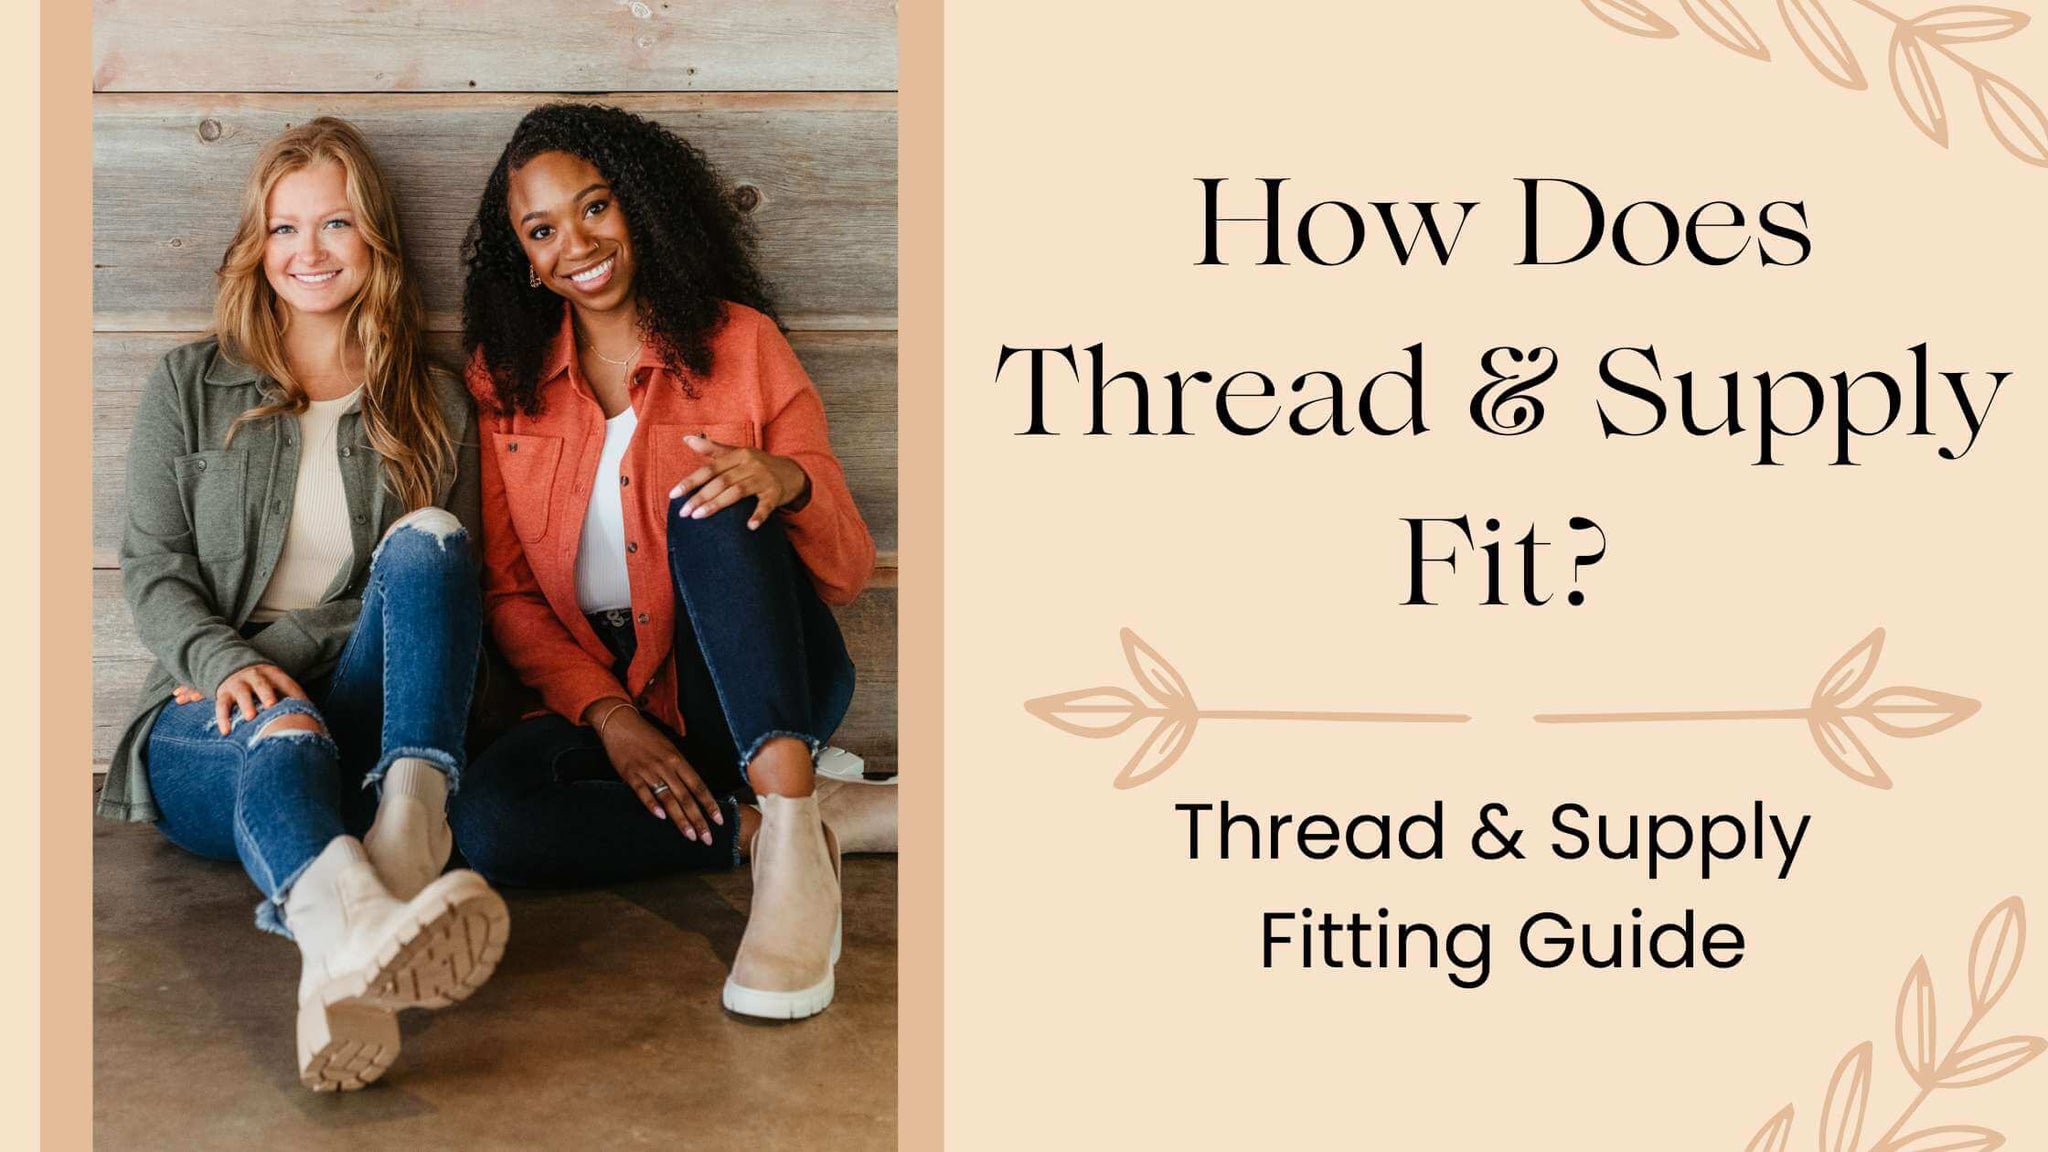 How Does Thread and Supply Fit? – Glik's